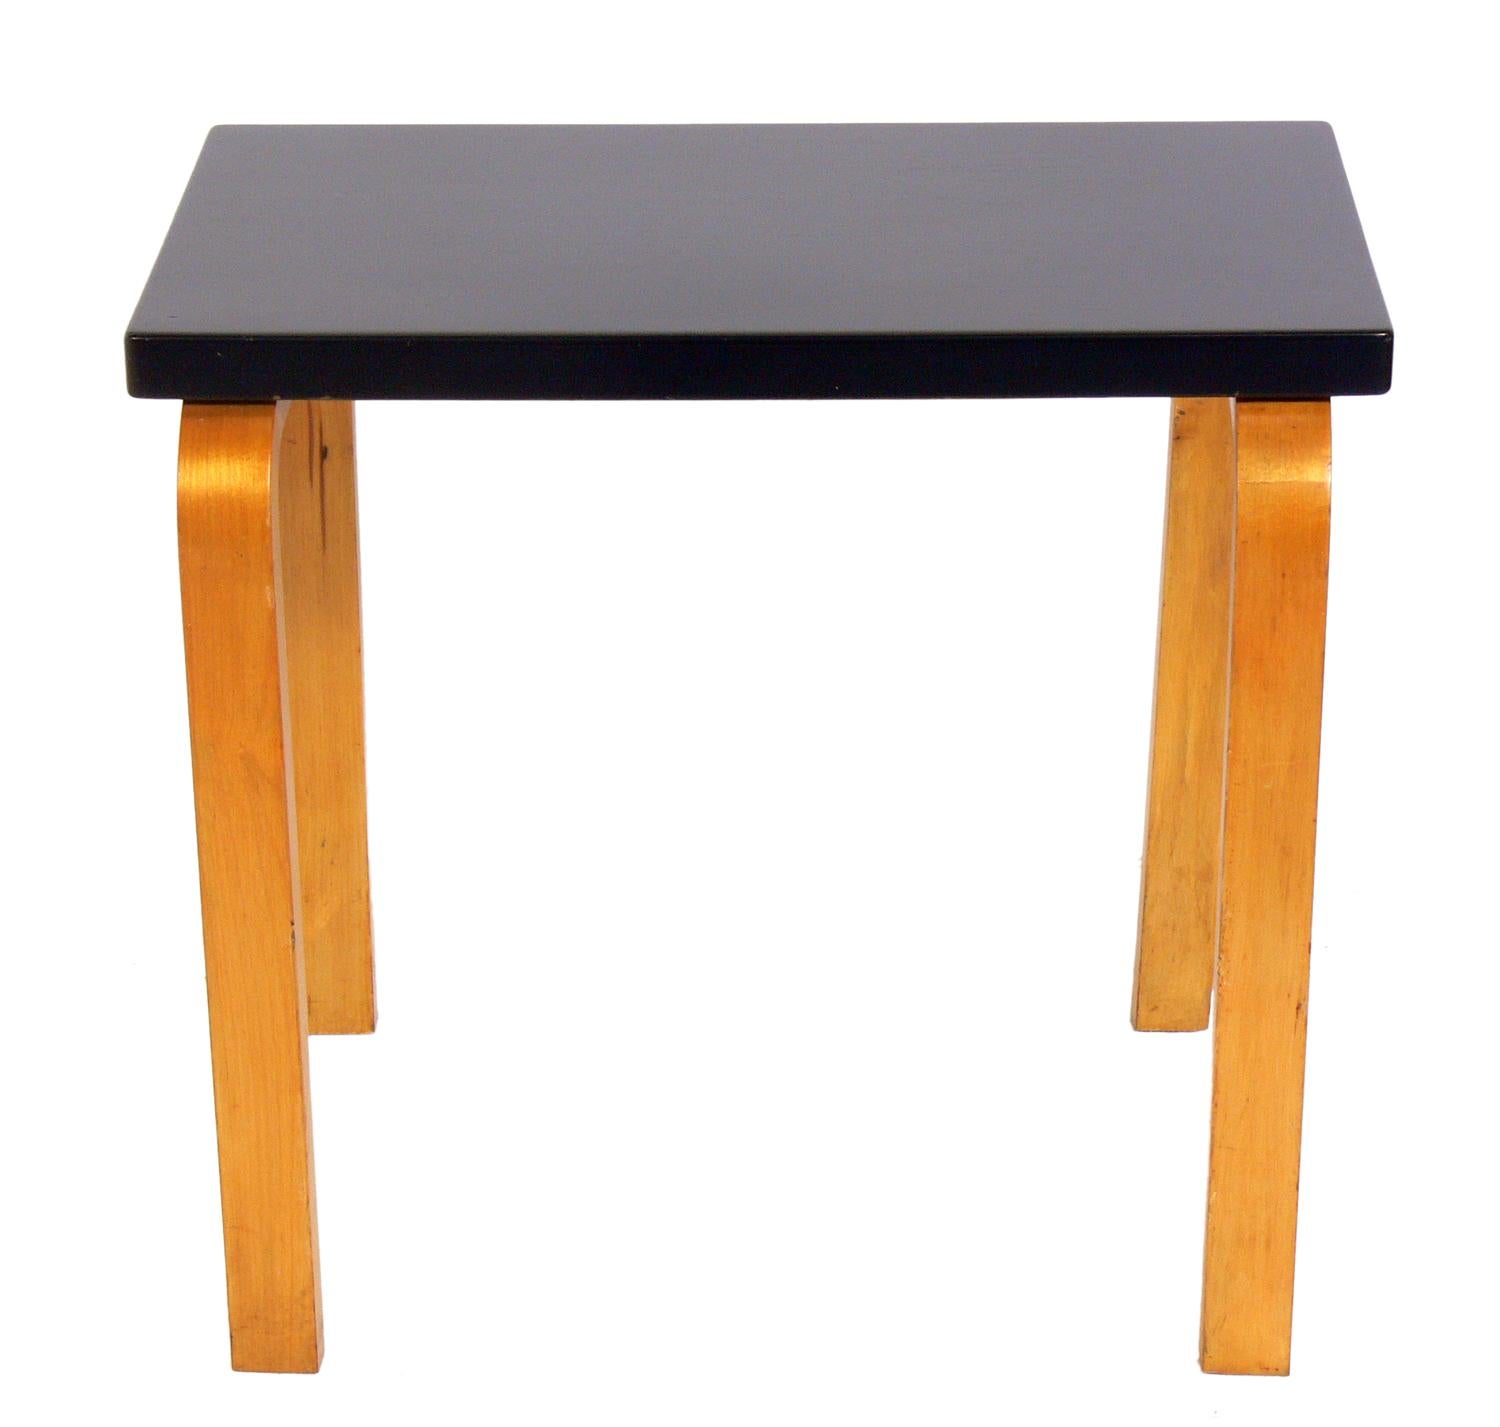 Early bentwood side table, designed by Alvar Aalto for Finmar, Finland, circa 1940s. Classic example of Danish modern design.